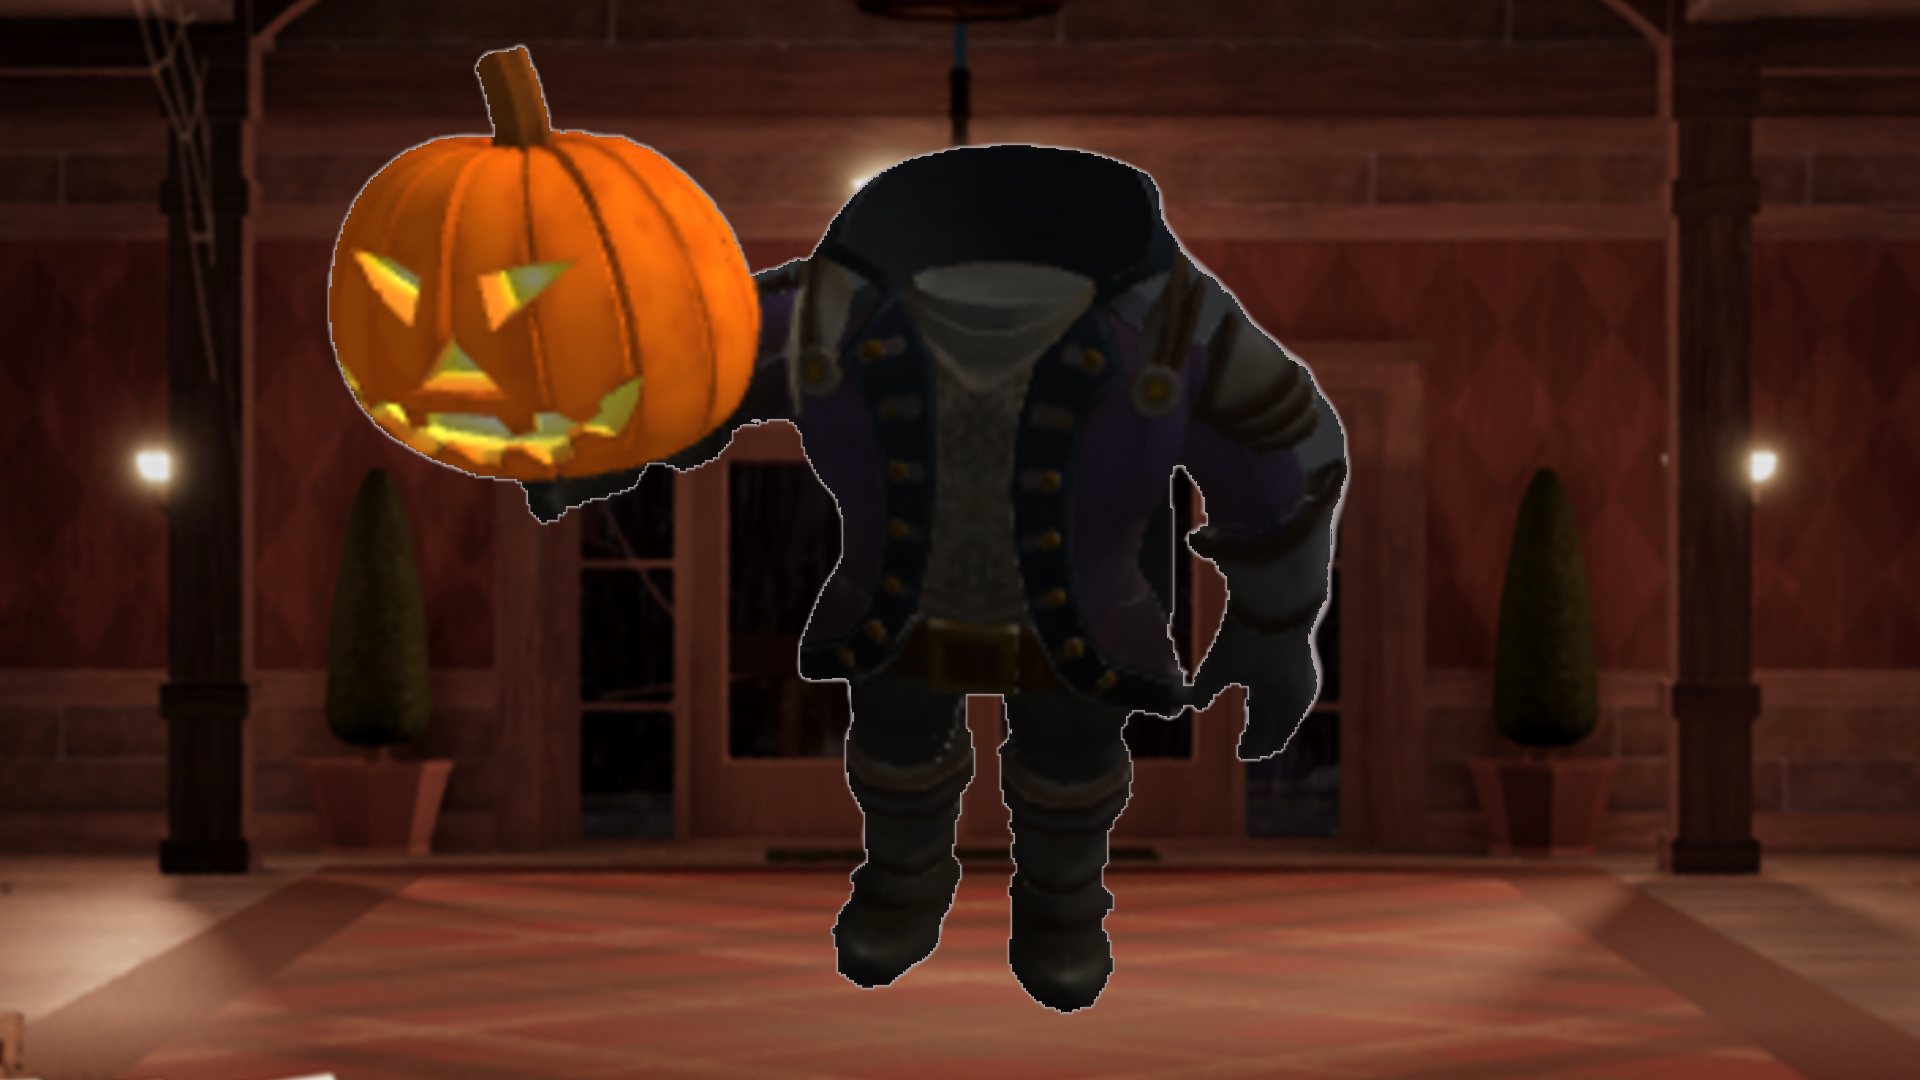 How Much is the Headless Head Roblox